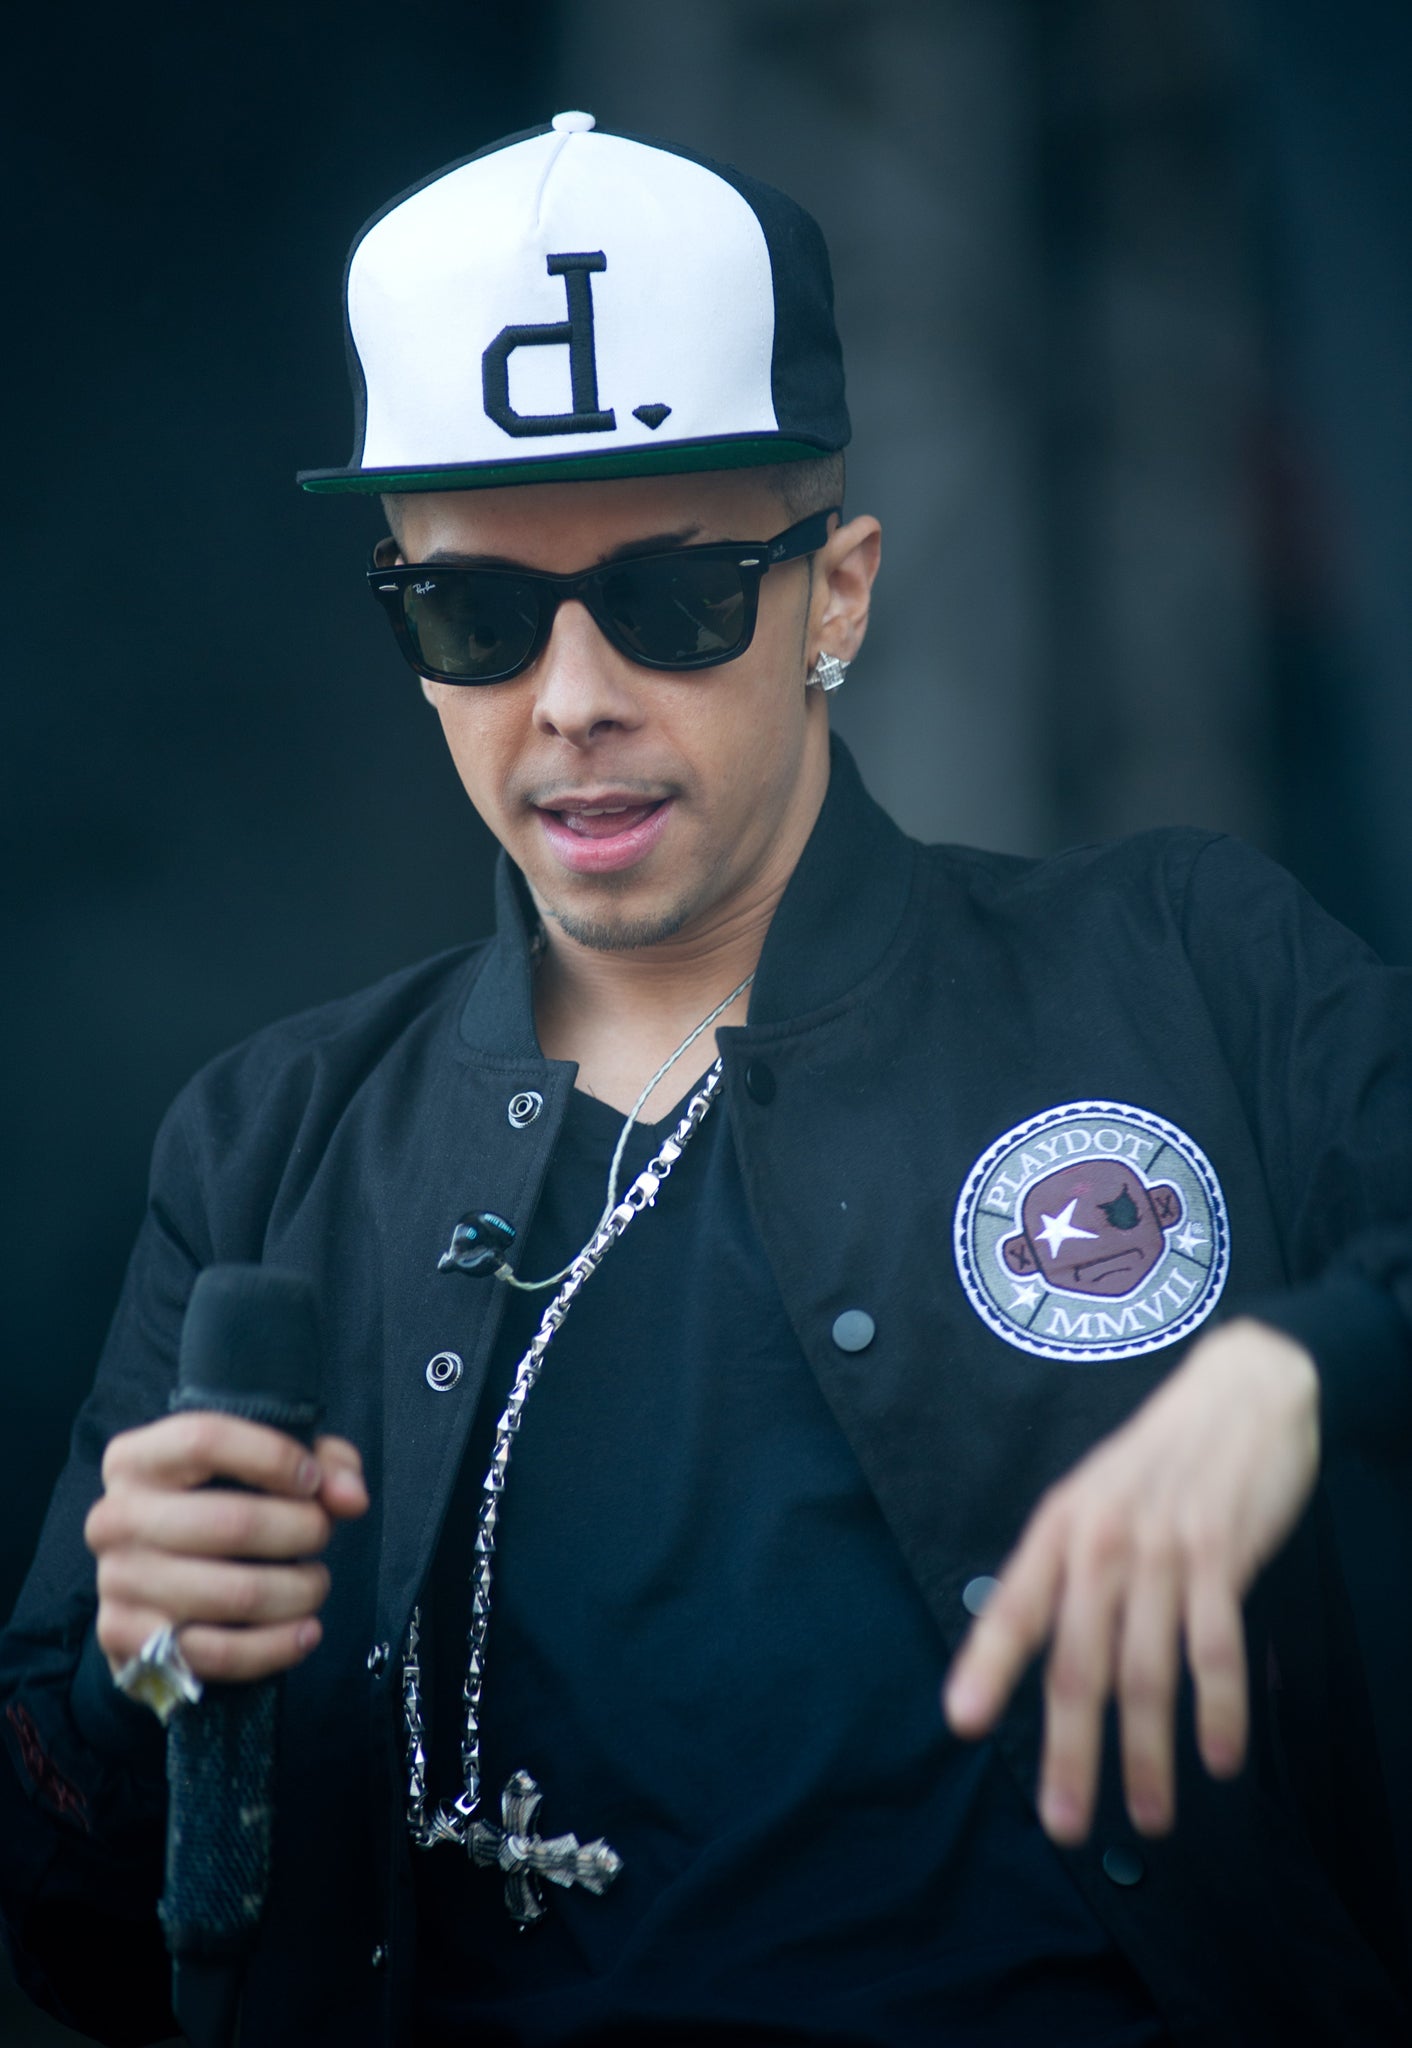 Dappy, real name Costadinos Contostavlos, has defended his role in an alleged skirmish at Play in Hereford on Friday night